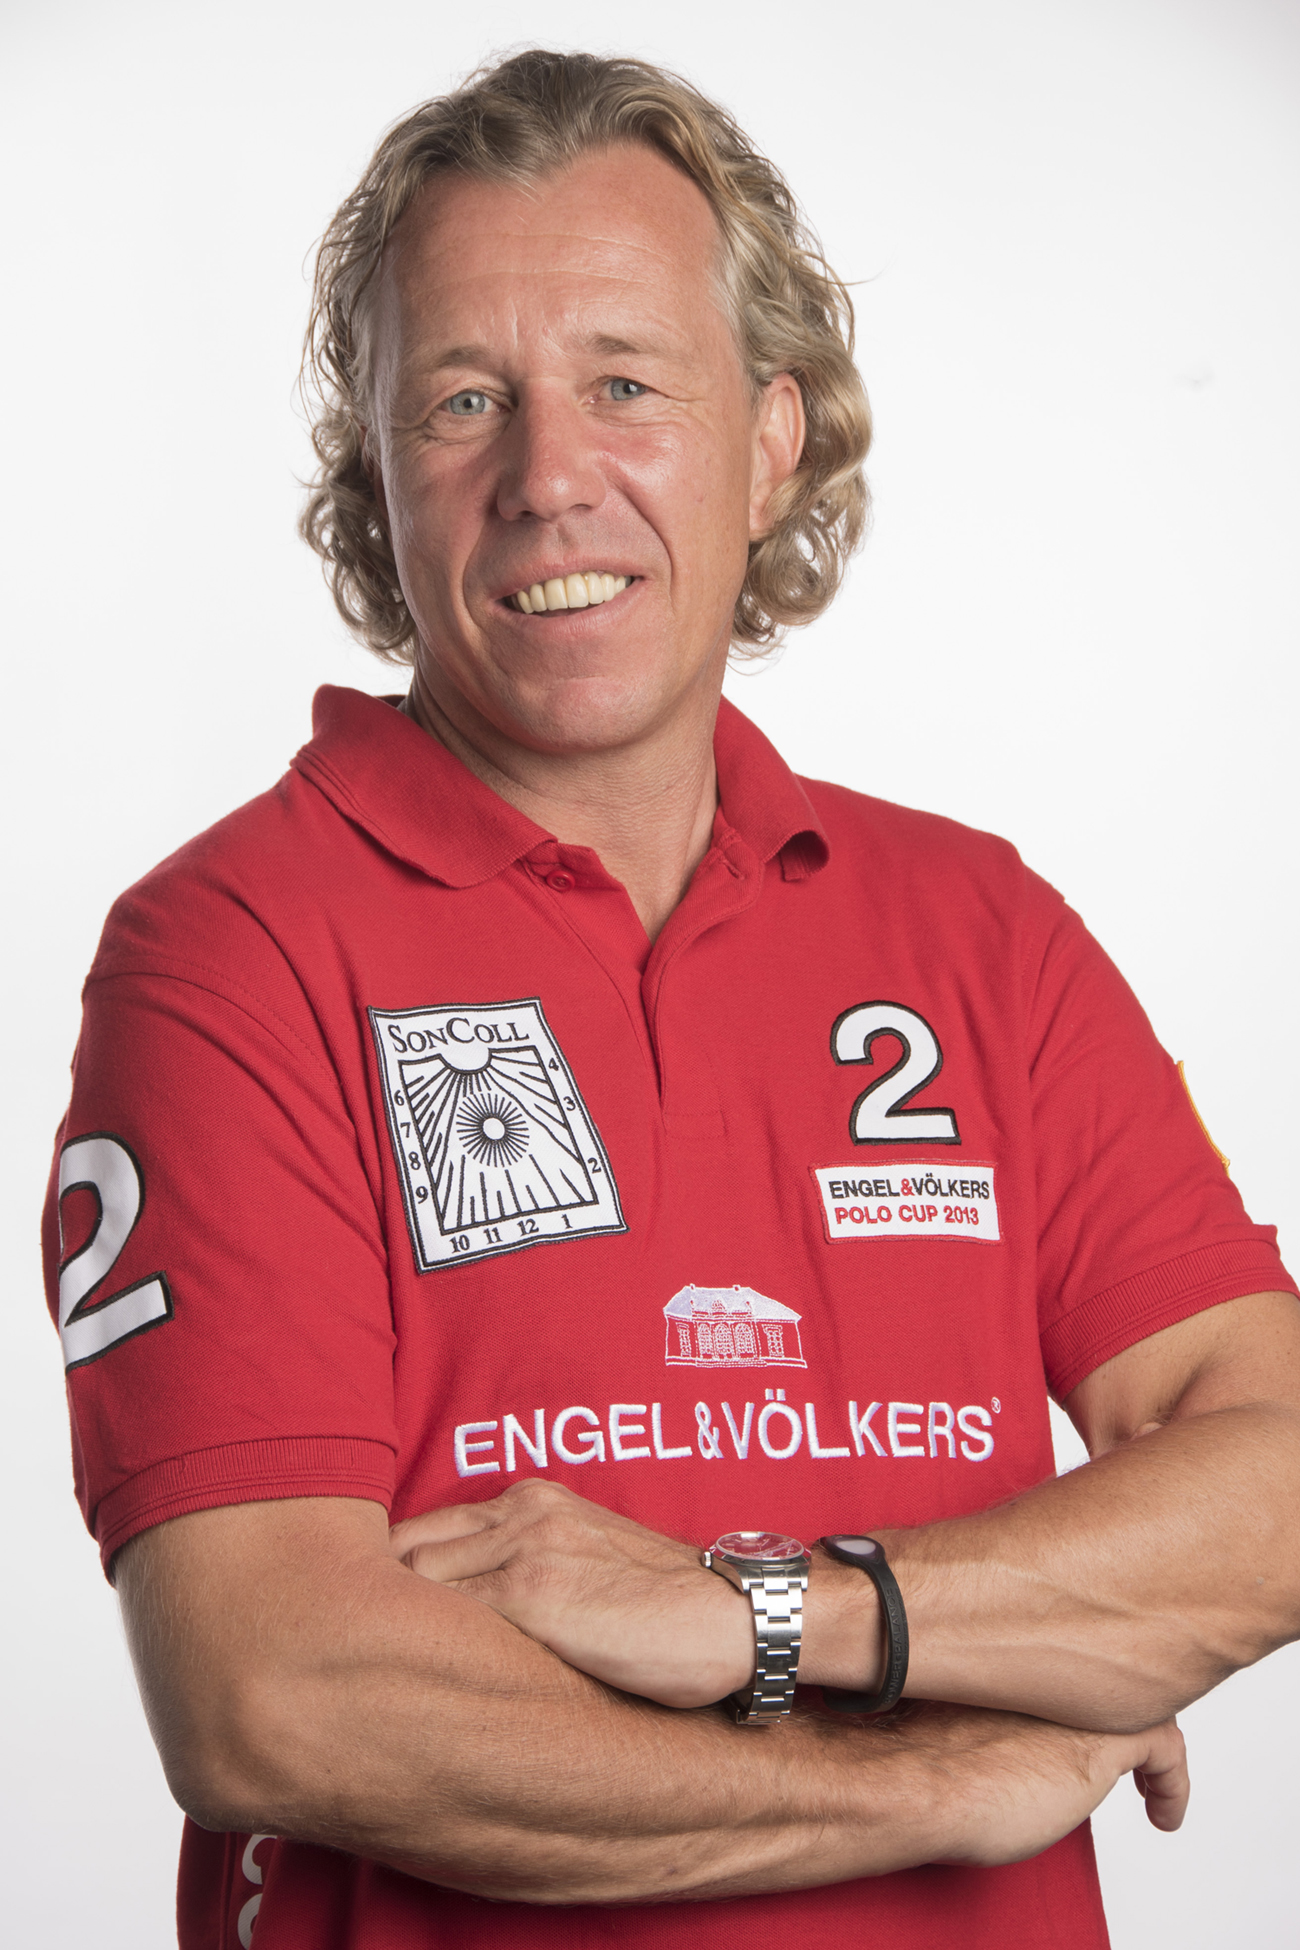 New Instructor at the Engel & Völkers + Land Rover Polo School